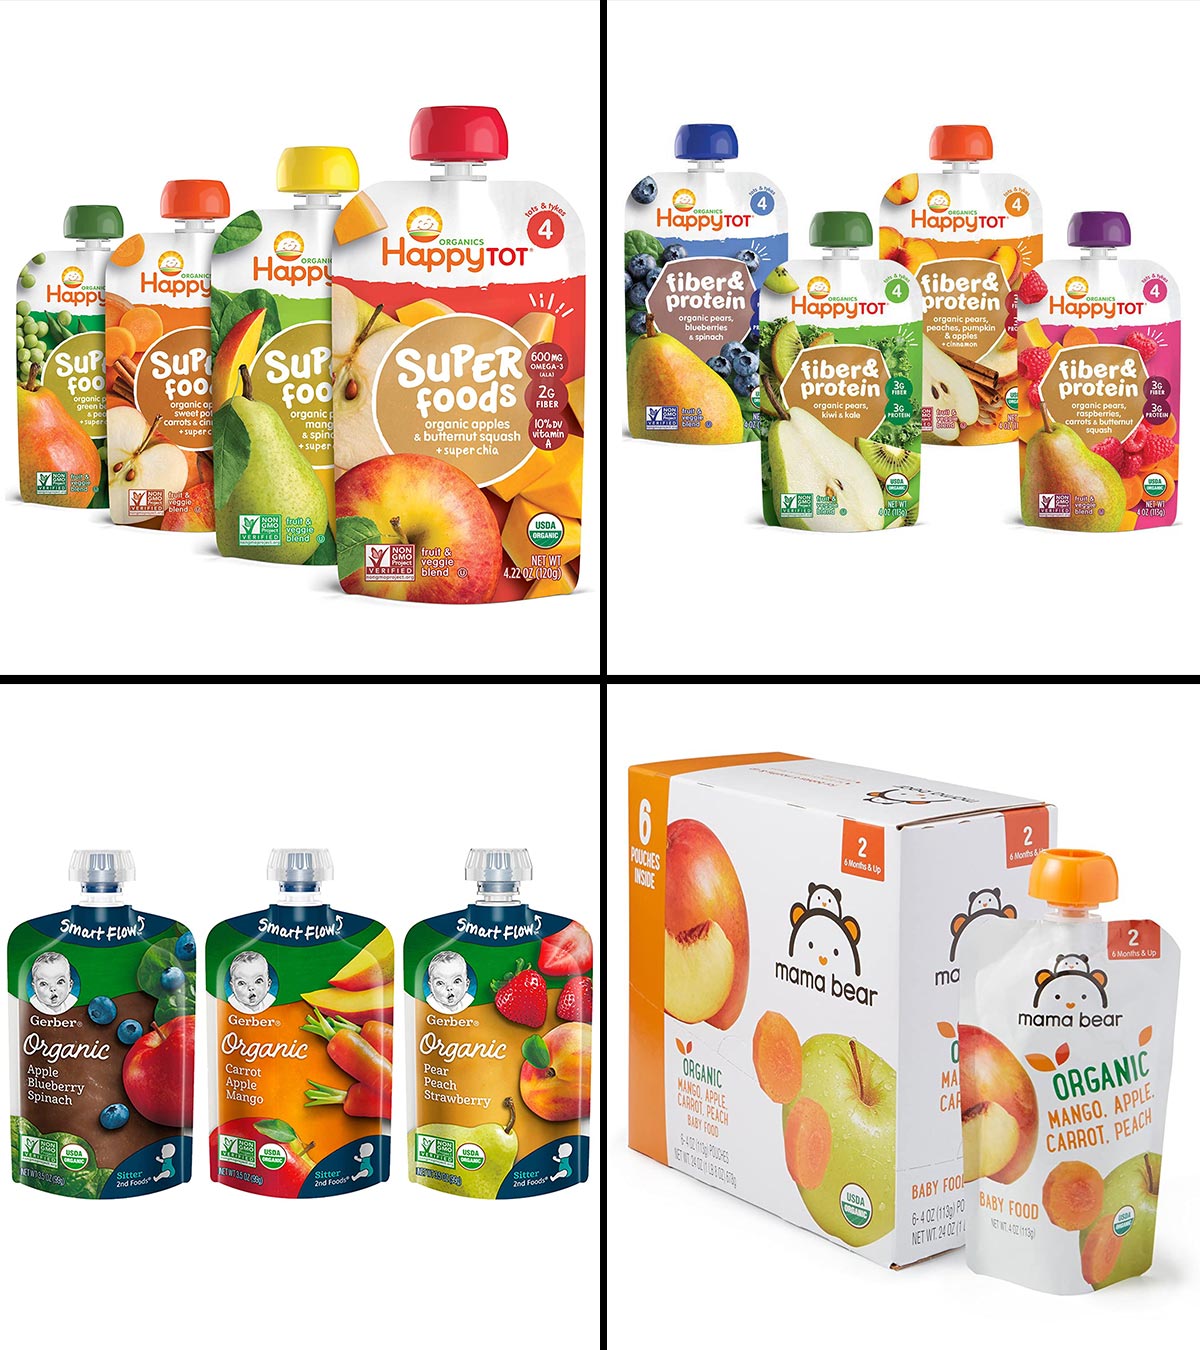 https://www.momjunction.com/wp-content/uploads/2021/08/15-Best-Baby-Food-Pouches-In-2021-Banner-MJ.jpg